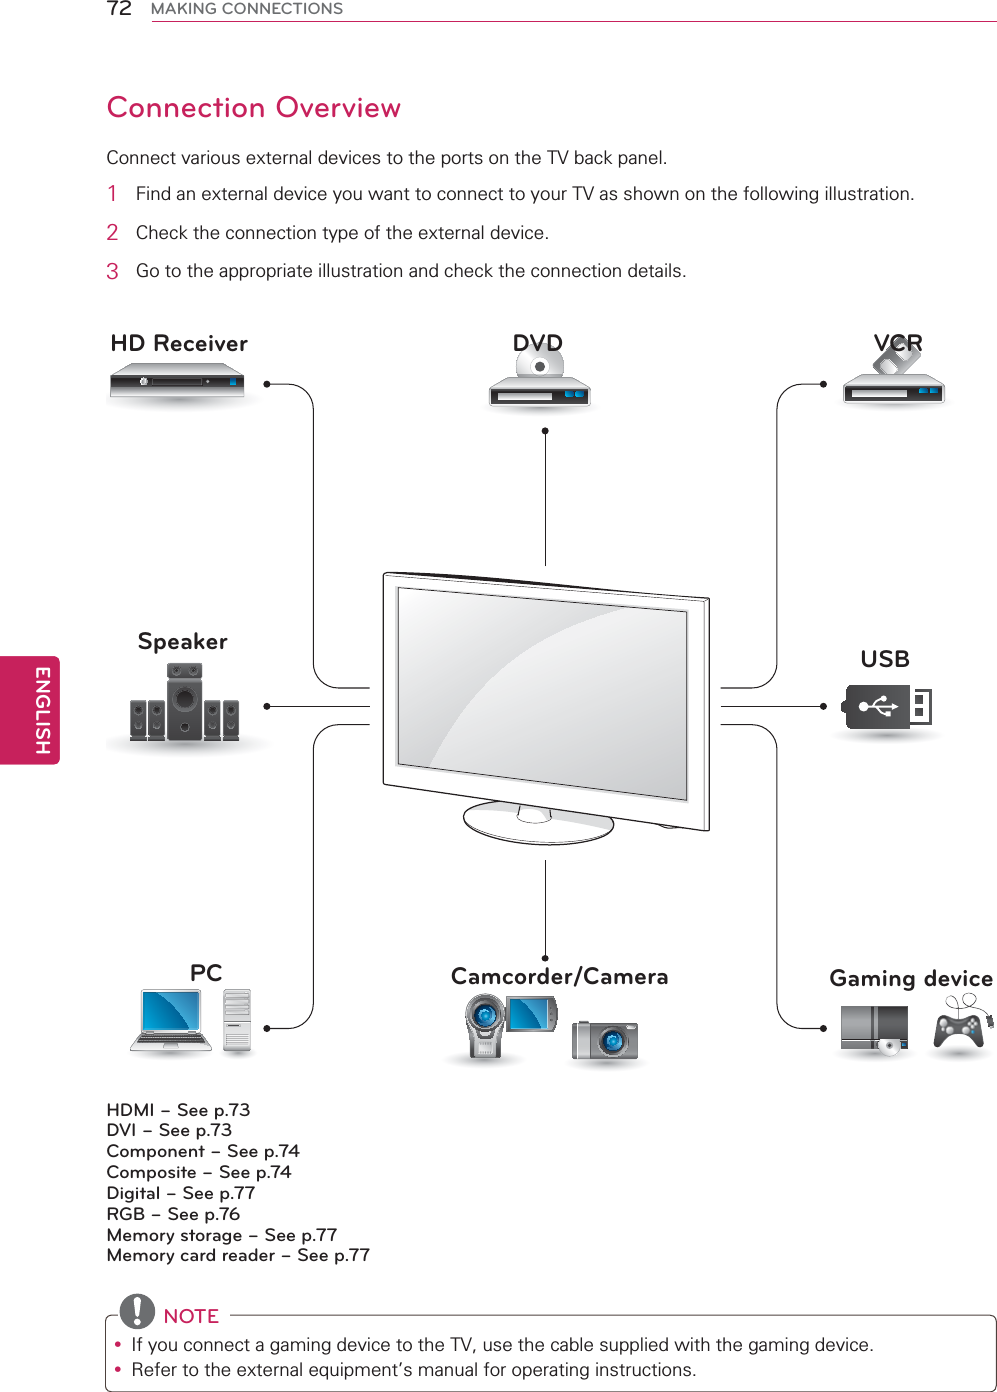 72ENGENGLISHMAKING CONNECTIONSConnection OverviewConnect various external devices to the ports on the TV back panel.1Find an external device you want to connect to your TV as shown on the following illustration.2Check the connection type of the external device.3Go to the appropriate illustration and check the connection details.NOTEyIf you connect a gaming device to the TV, use the cable supplied with the gaming device.yRefer to the external equipment’s manual for operating instructions.HDMI – See p.73DVI – See p.73Component – See p.74Composite – See p.74Digital – See p.77RGB – See p.76Memory storage – See p.77Memory card reader – See p.77HD Receiver DVD VCRSpeaker USBPC Camcorder/Camera Gaming device